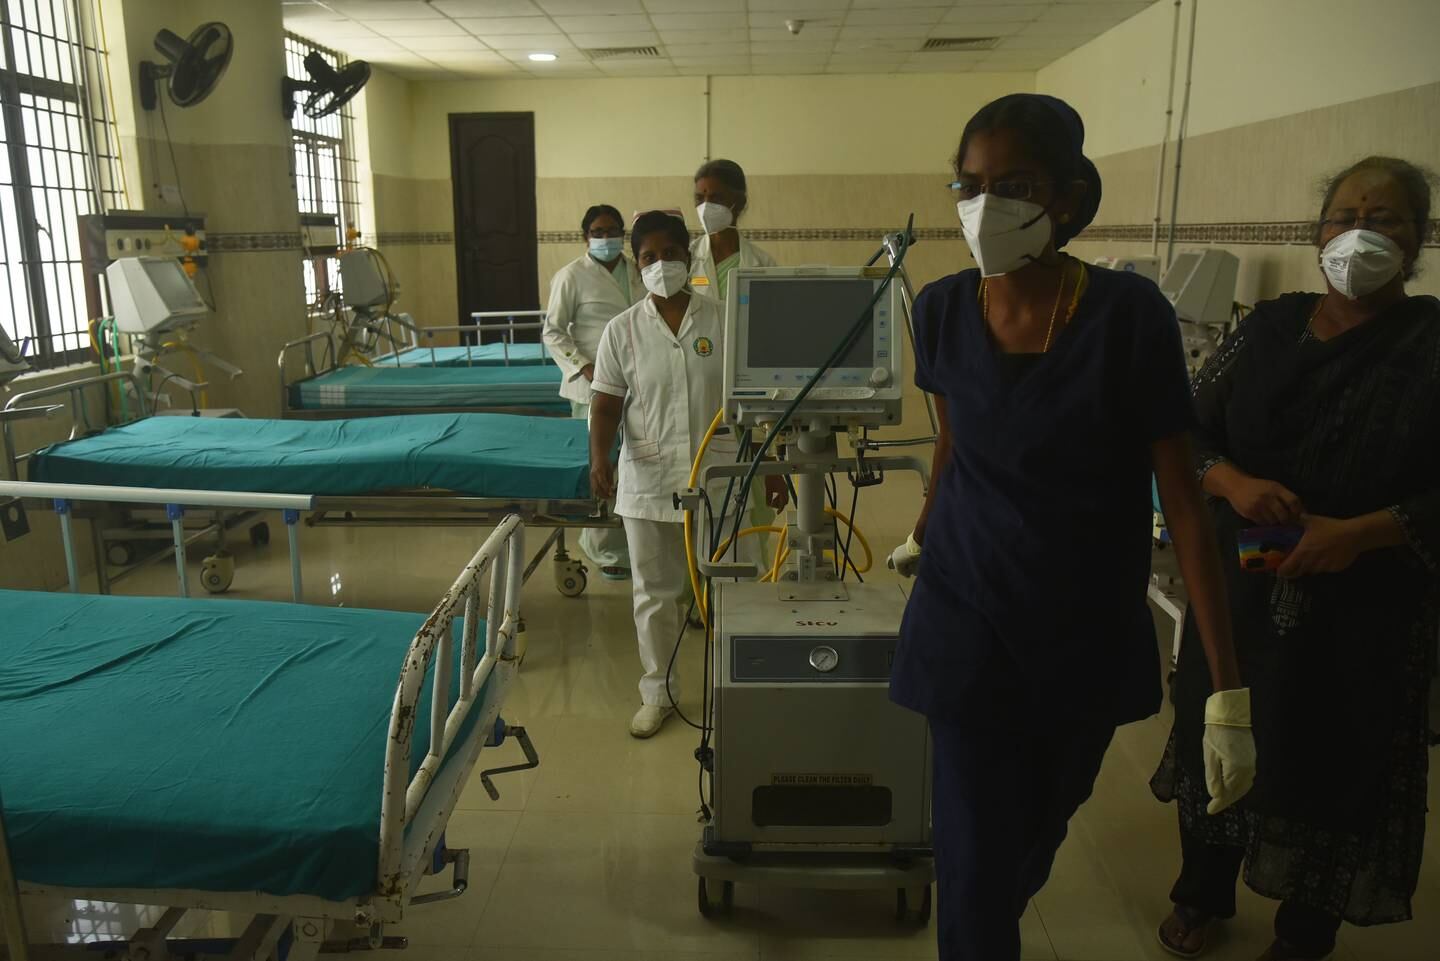 Health workers prepare a Covid-19 ward at a government hospital in Chennai, India, amid a rise in cases. EPA